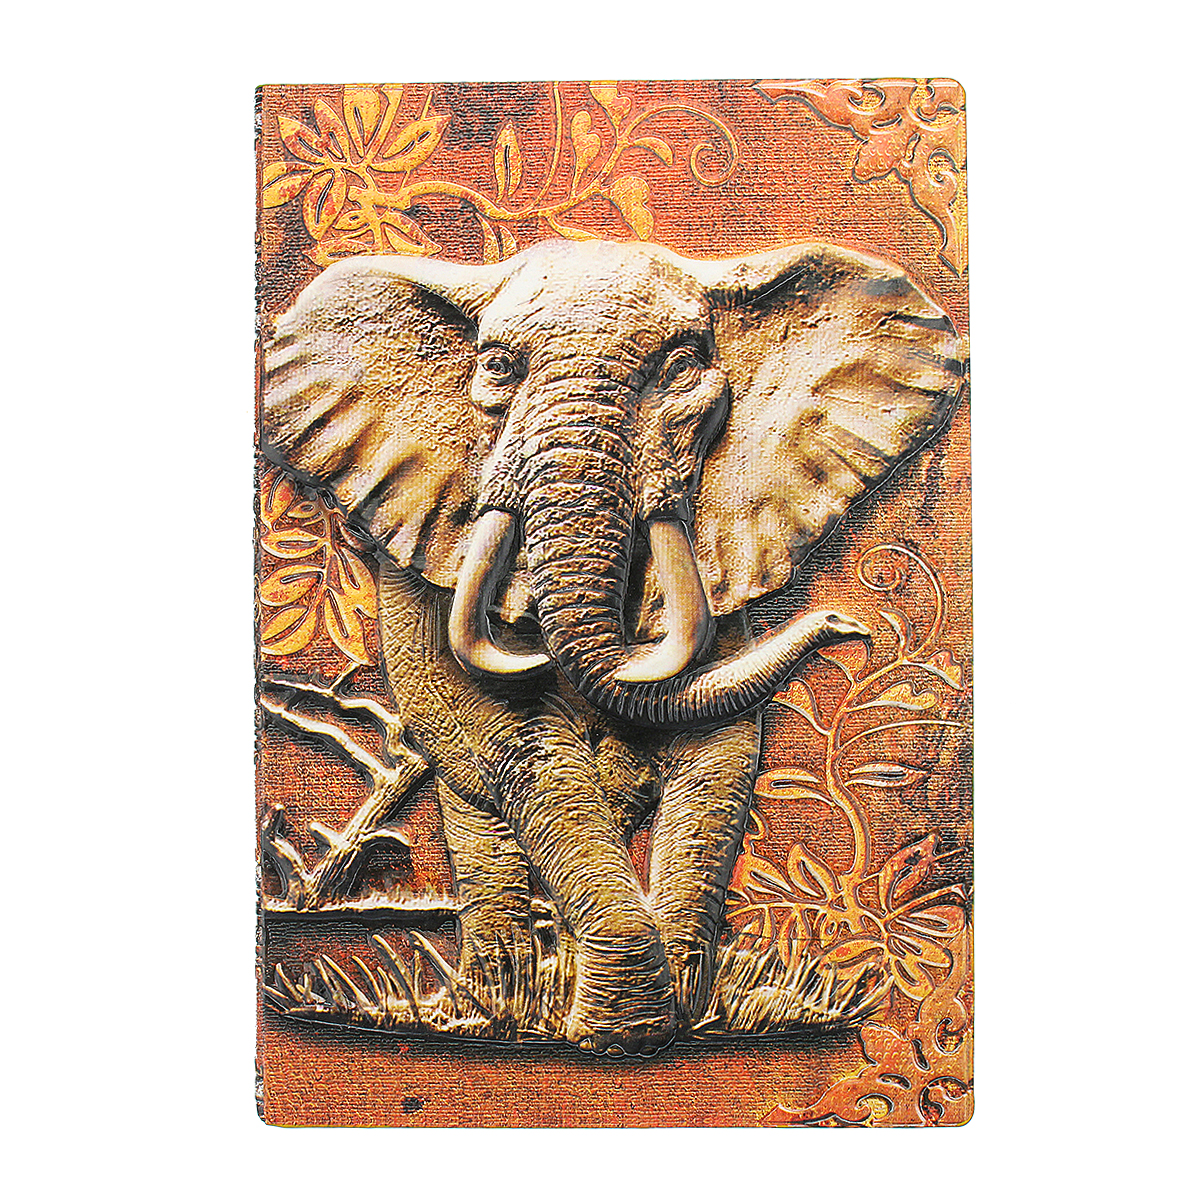 European-elephant-relief-retro-notebook-gift-book-PU-travel-gift-8yue-1631372-3